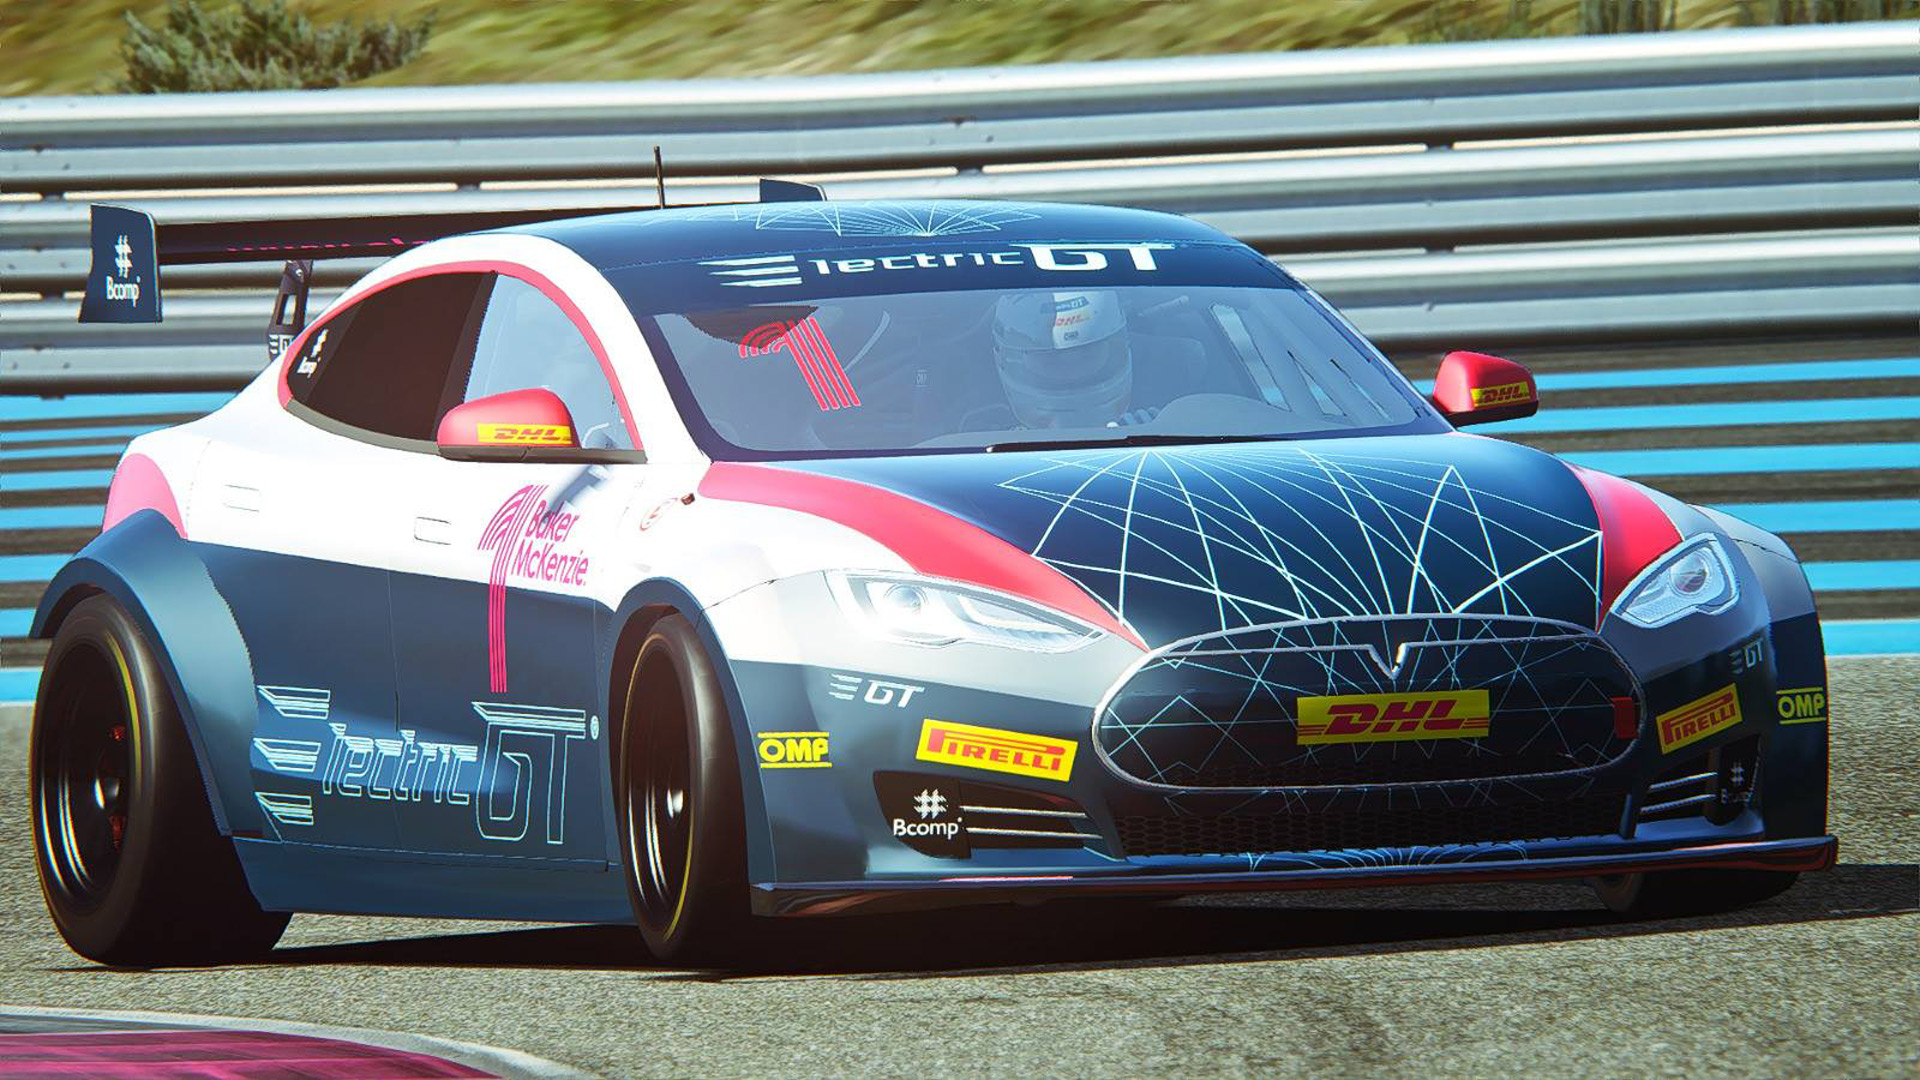 ramp Maken Aankondiging Tesla Model S racing is now a real thing, approved by FIA sanctioning body